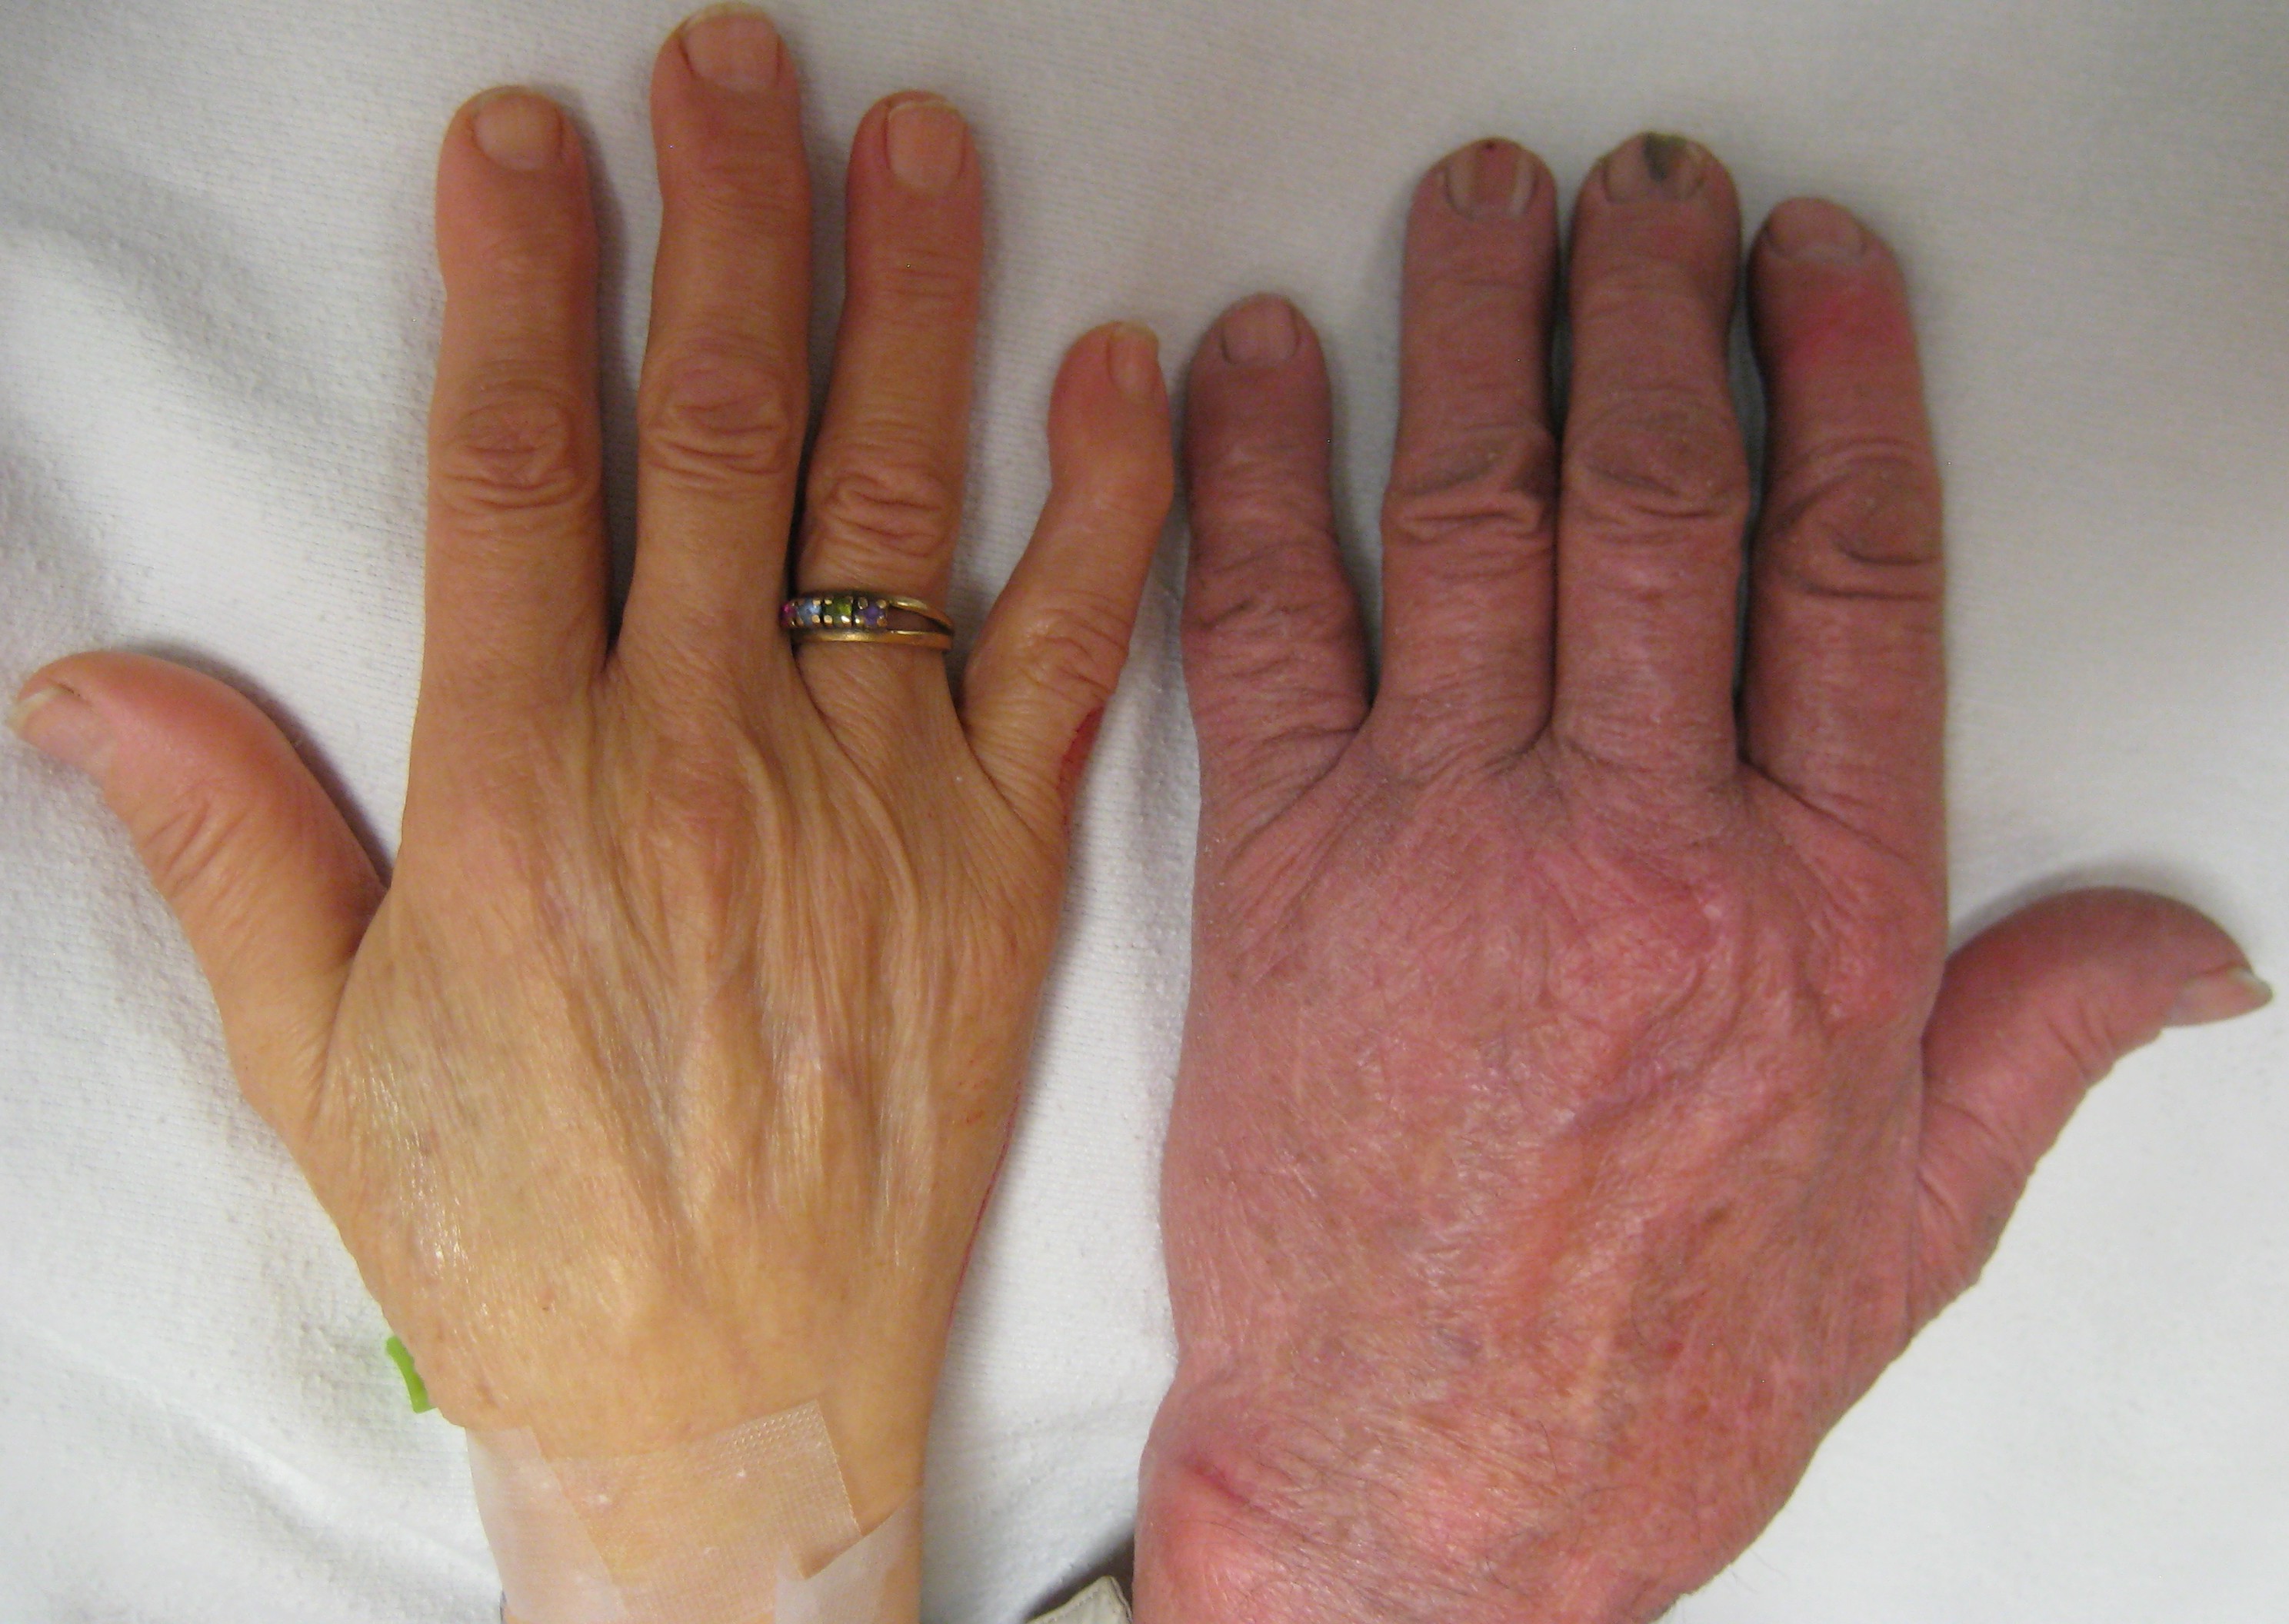 The hand of a person with severe anemia (on the left) compared to one without (on the right) Source -James Heilman, MD - Own work[5]